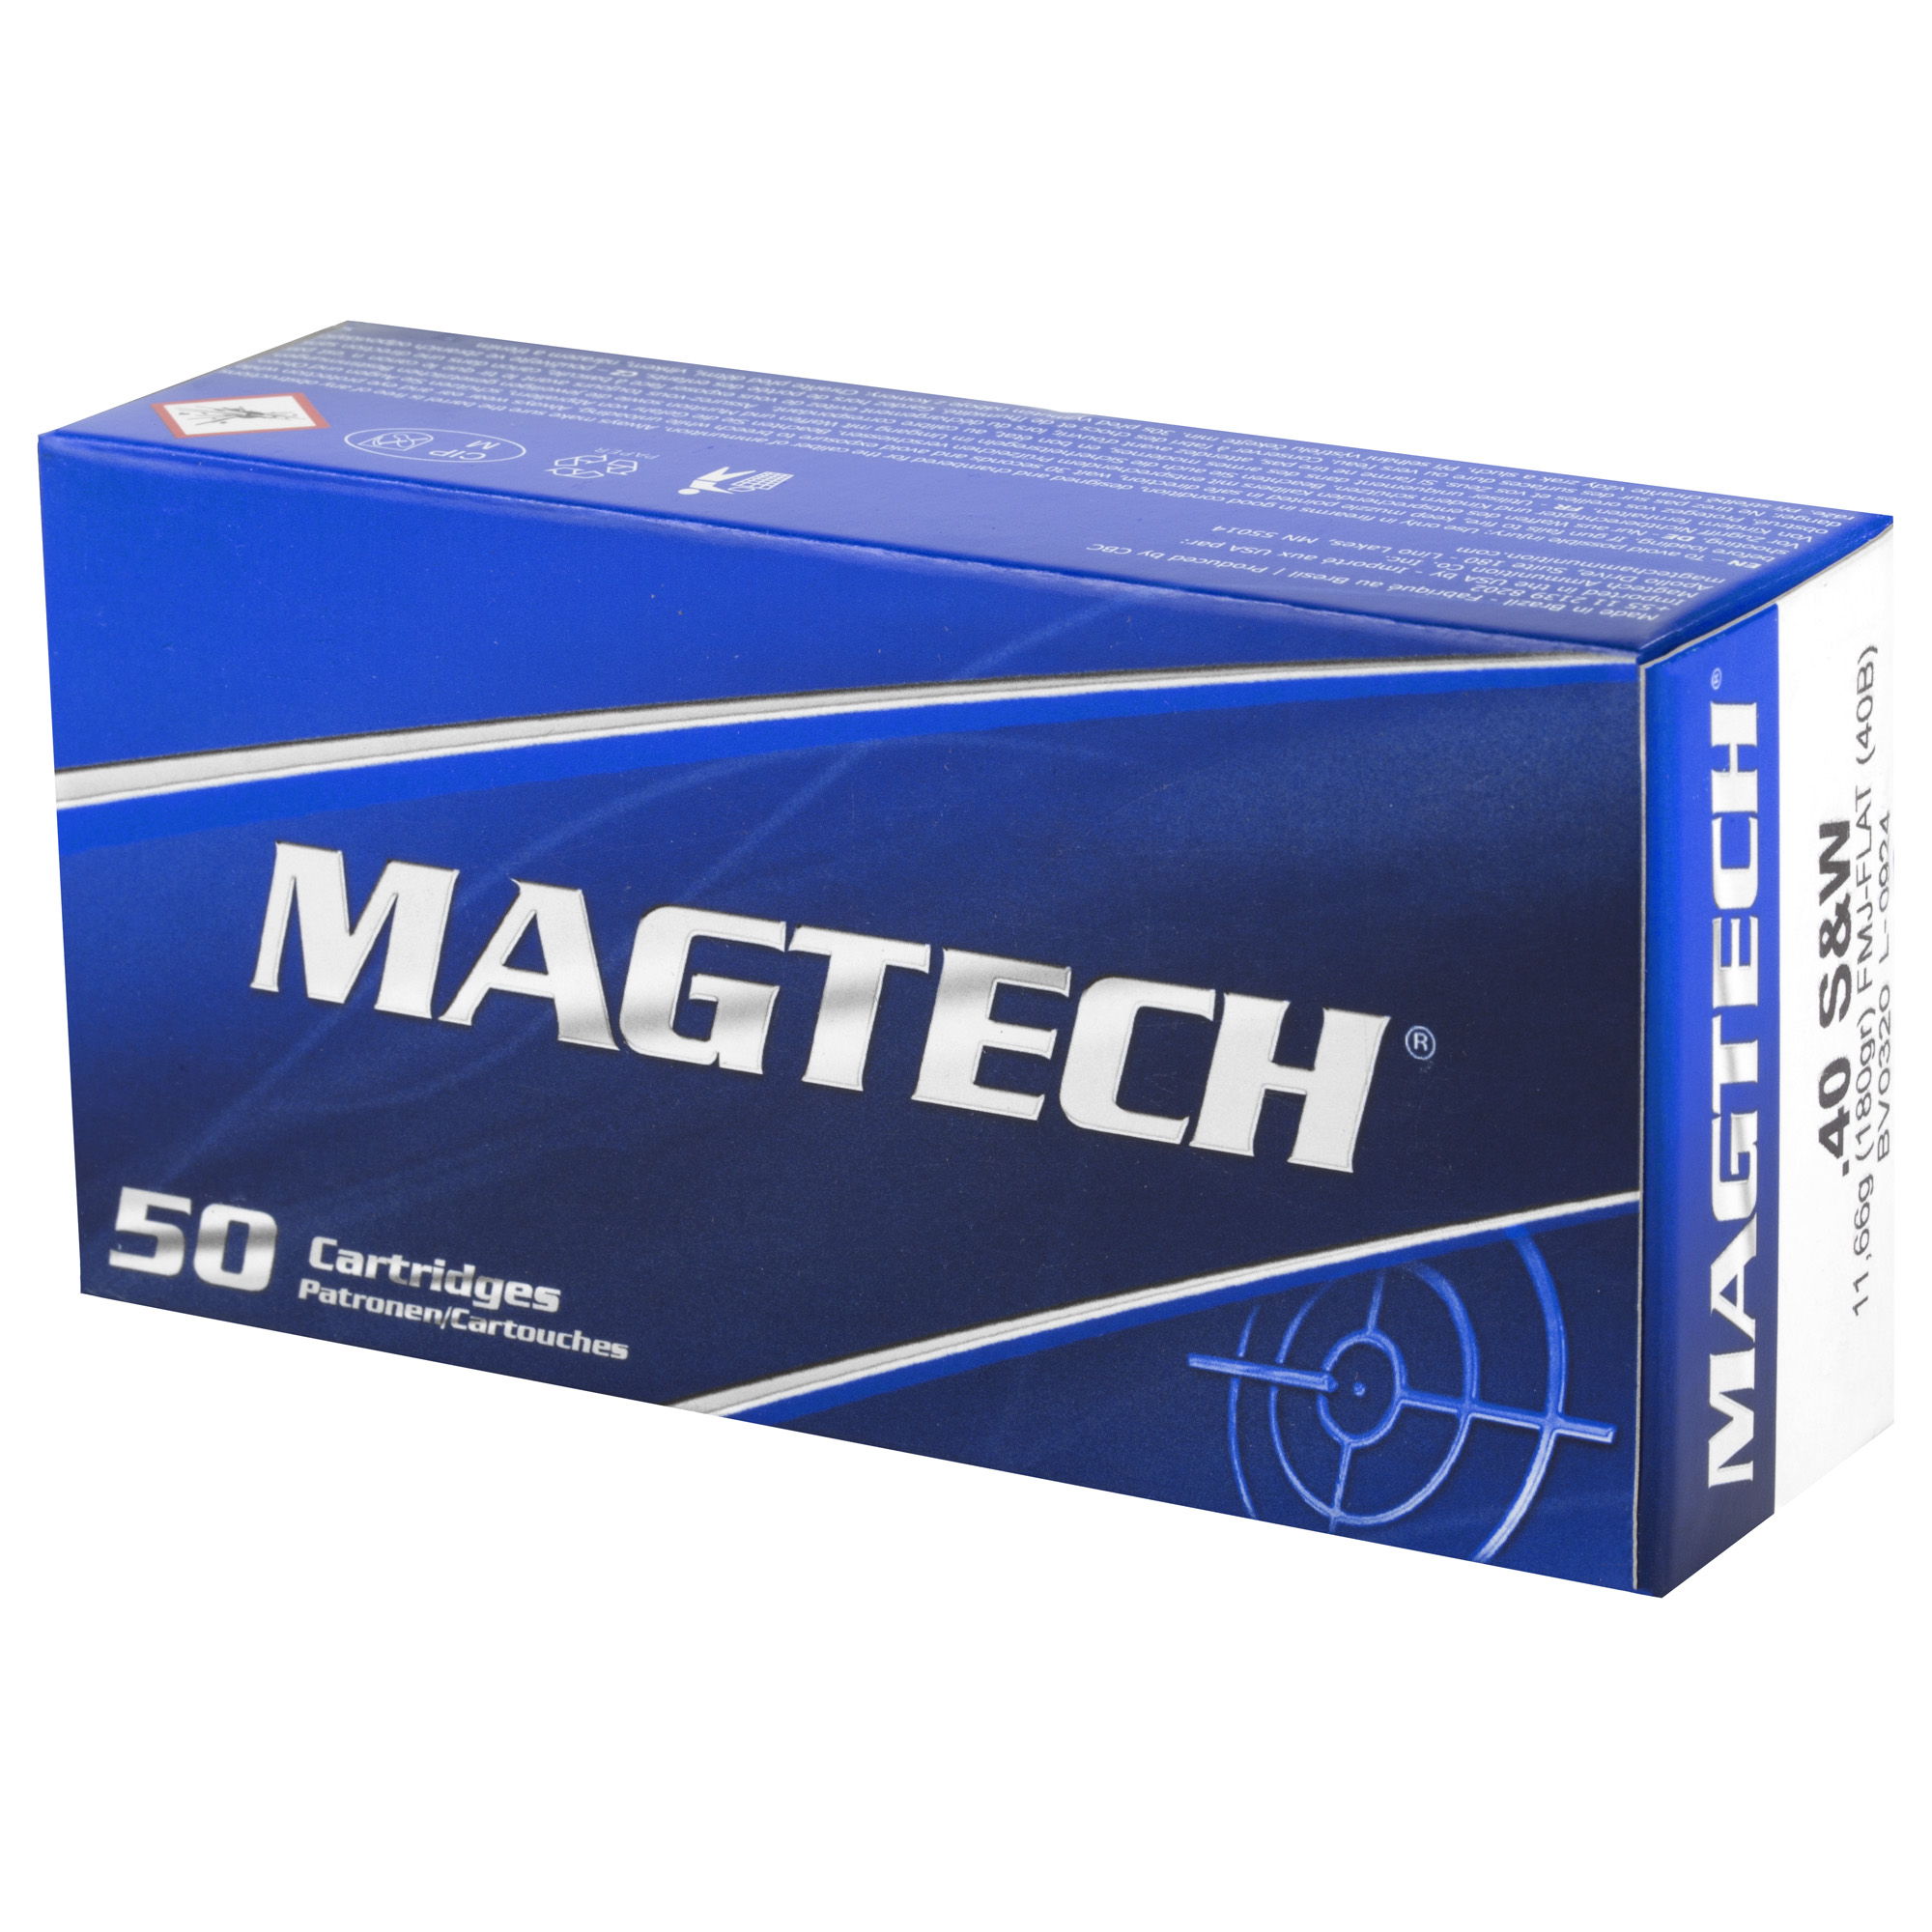 Magtech, Sport Shooting, 40S&W, 180 Grain FMJ, Flat Nose, Full Metal Case, 50 Round Box,  Case Pack 20-Boxes (1000Rds.), 40B,